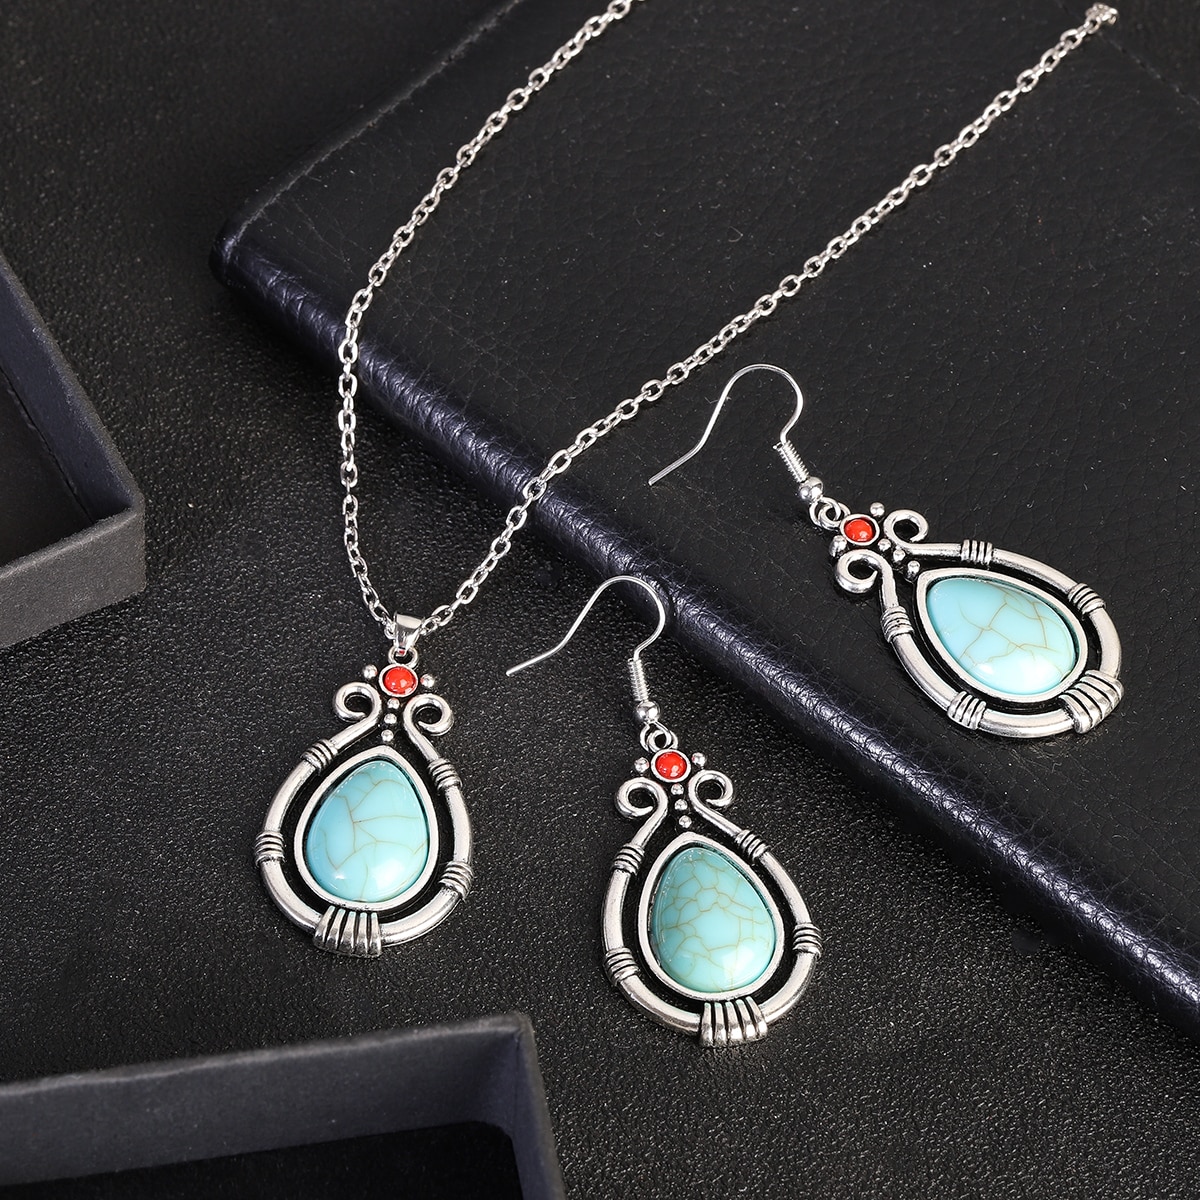 Ethnic-Boho-Red-Blue-Stone-Pendant-Necklace-Earring-Set-Women-Girls-Silver-Color-Geometric-Jewelry-S-1005004921122202-4